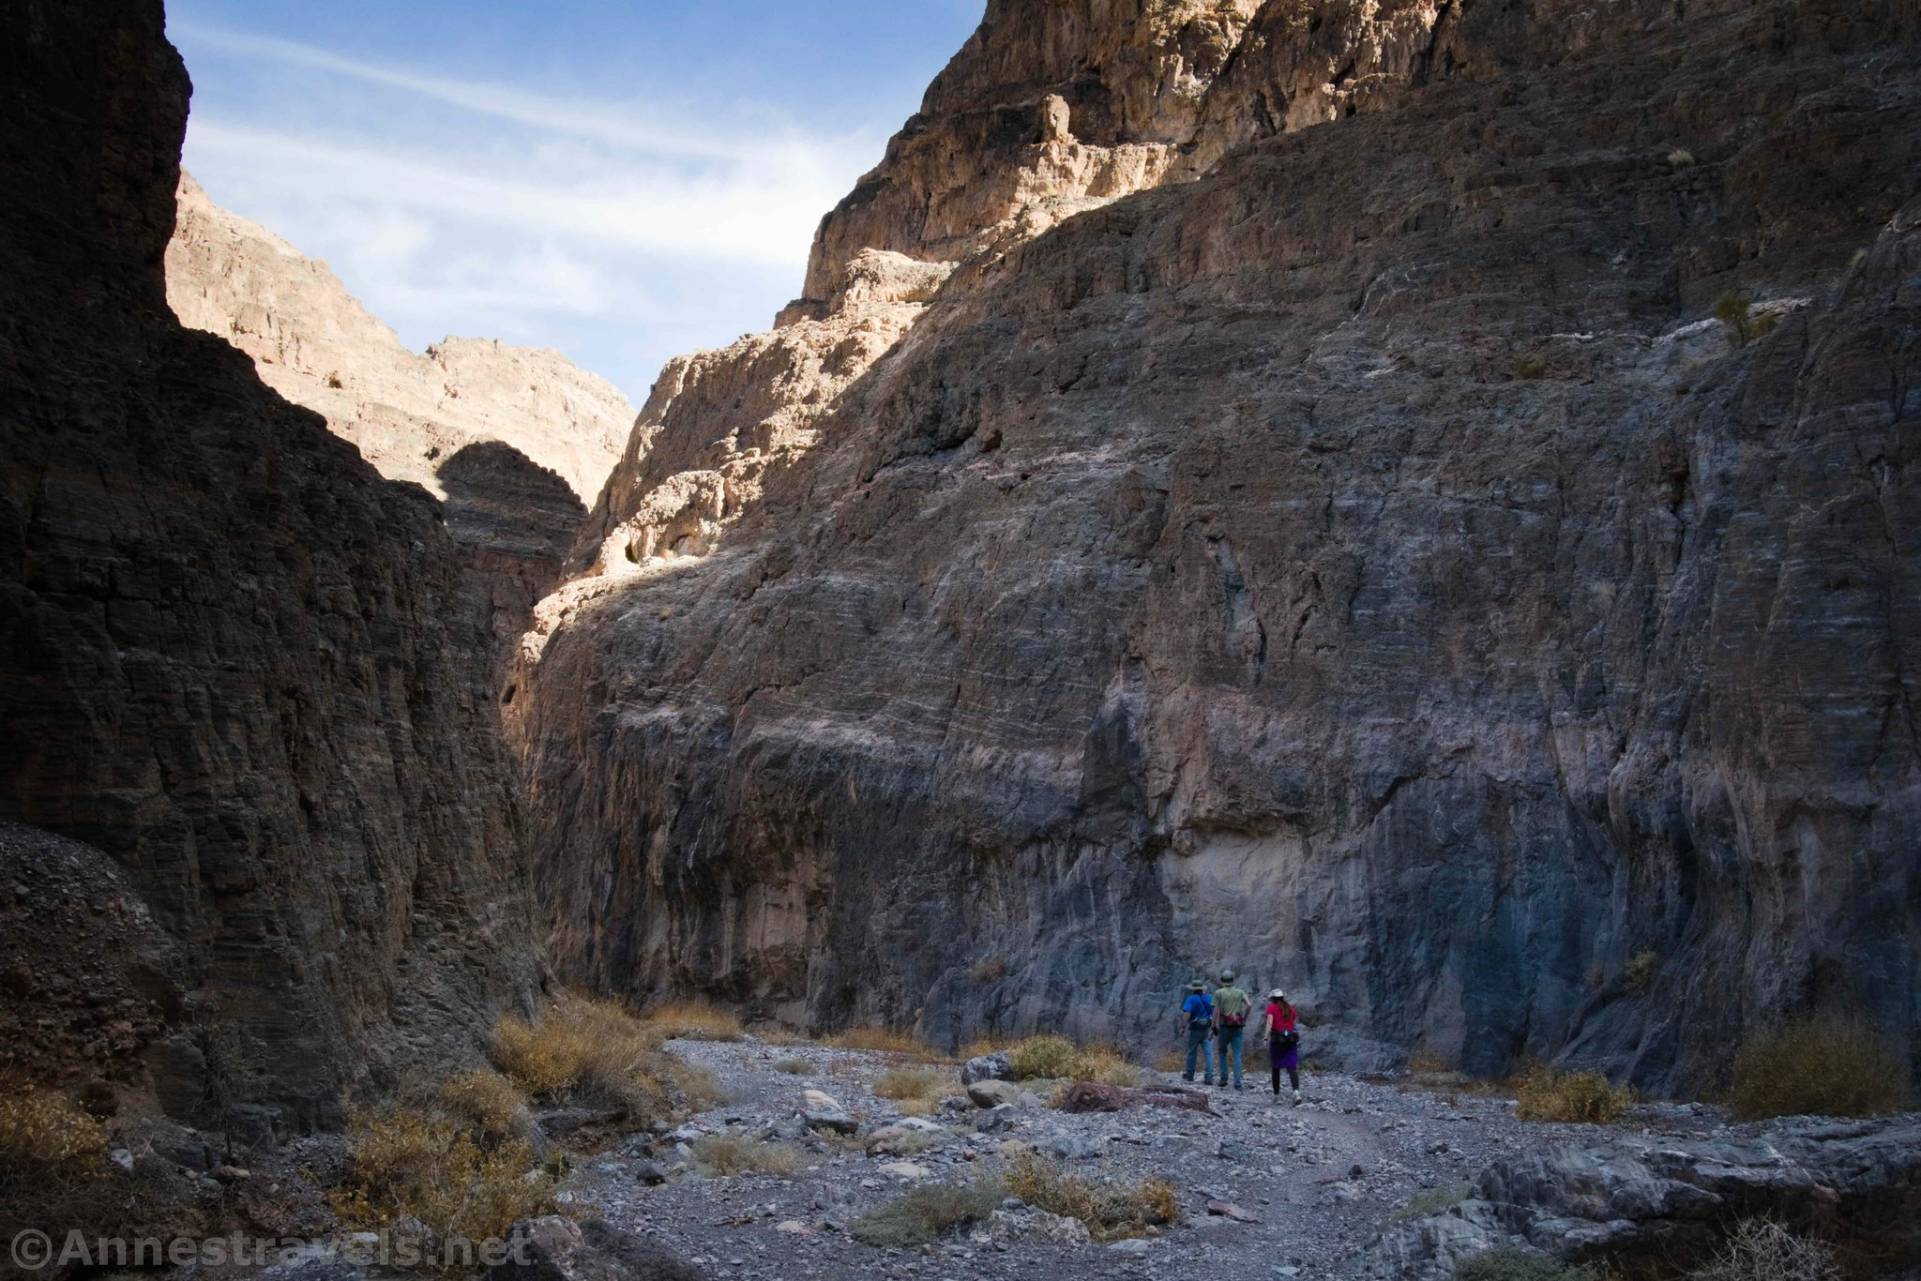 Hiking up the lower part of Fall Canyon, Death Valley National Park, California